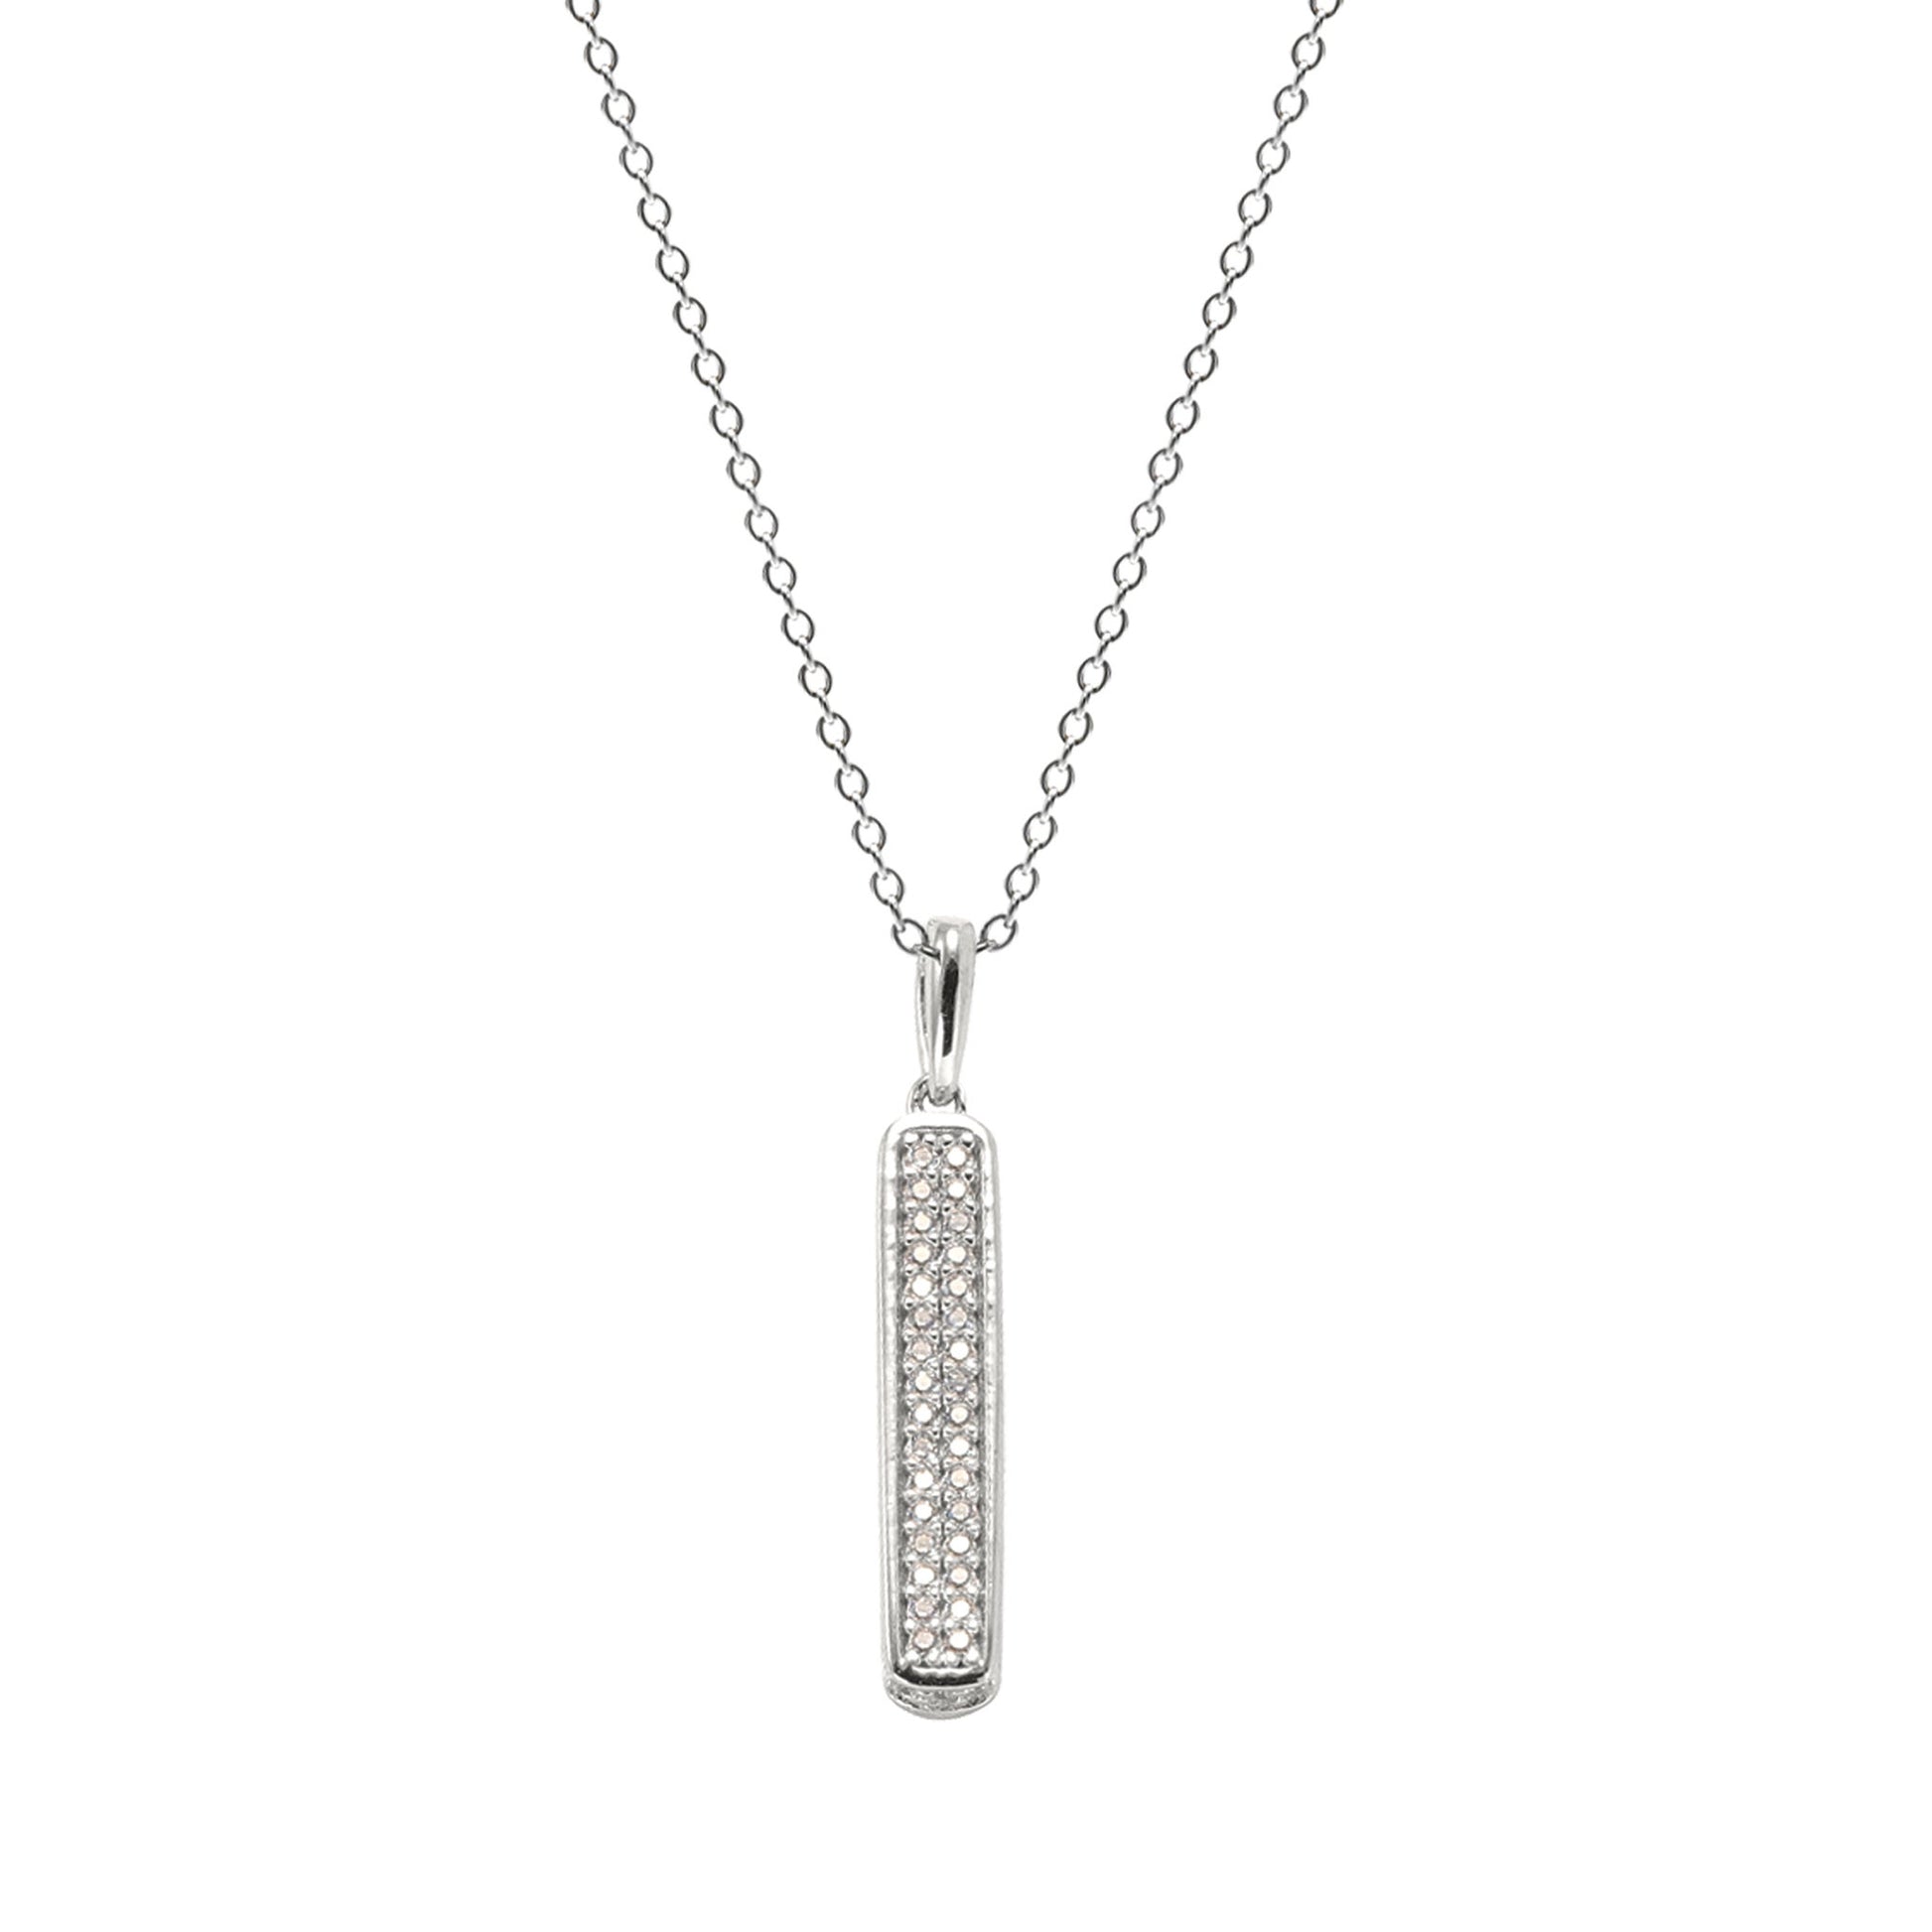 A 3 sided bar pendant with simulated diamonds displayed on a neutral white background.